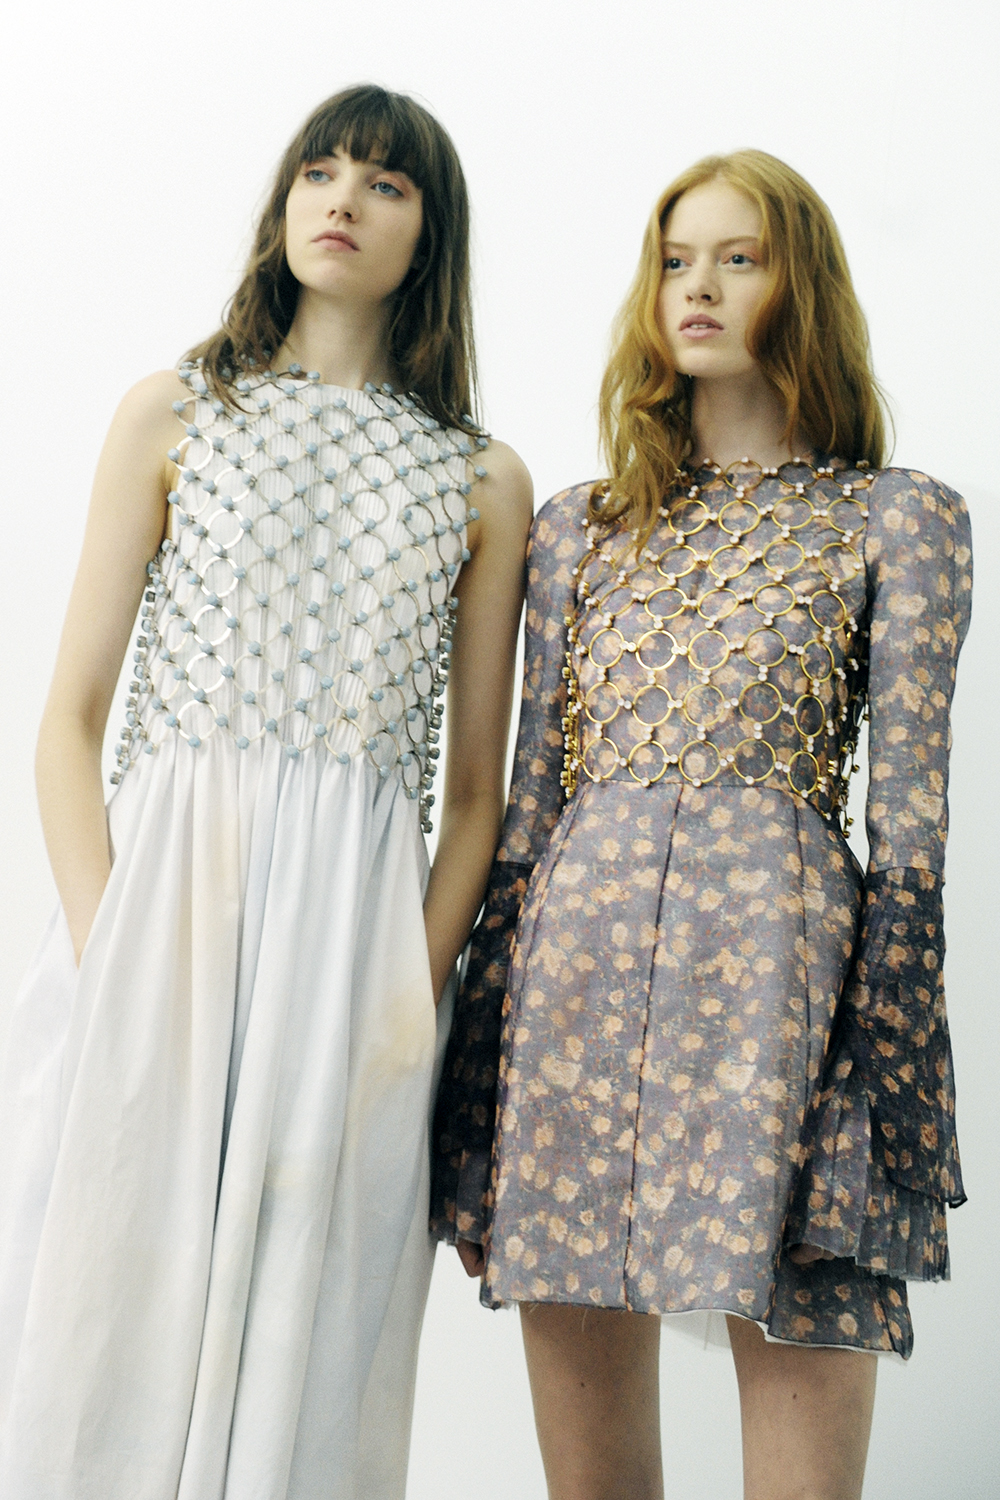 BACKSTAGE AT DIOR HAUTE COUTURE FALL-WINTER 2015-16 PARIS